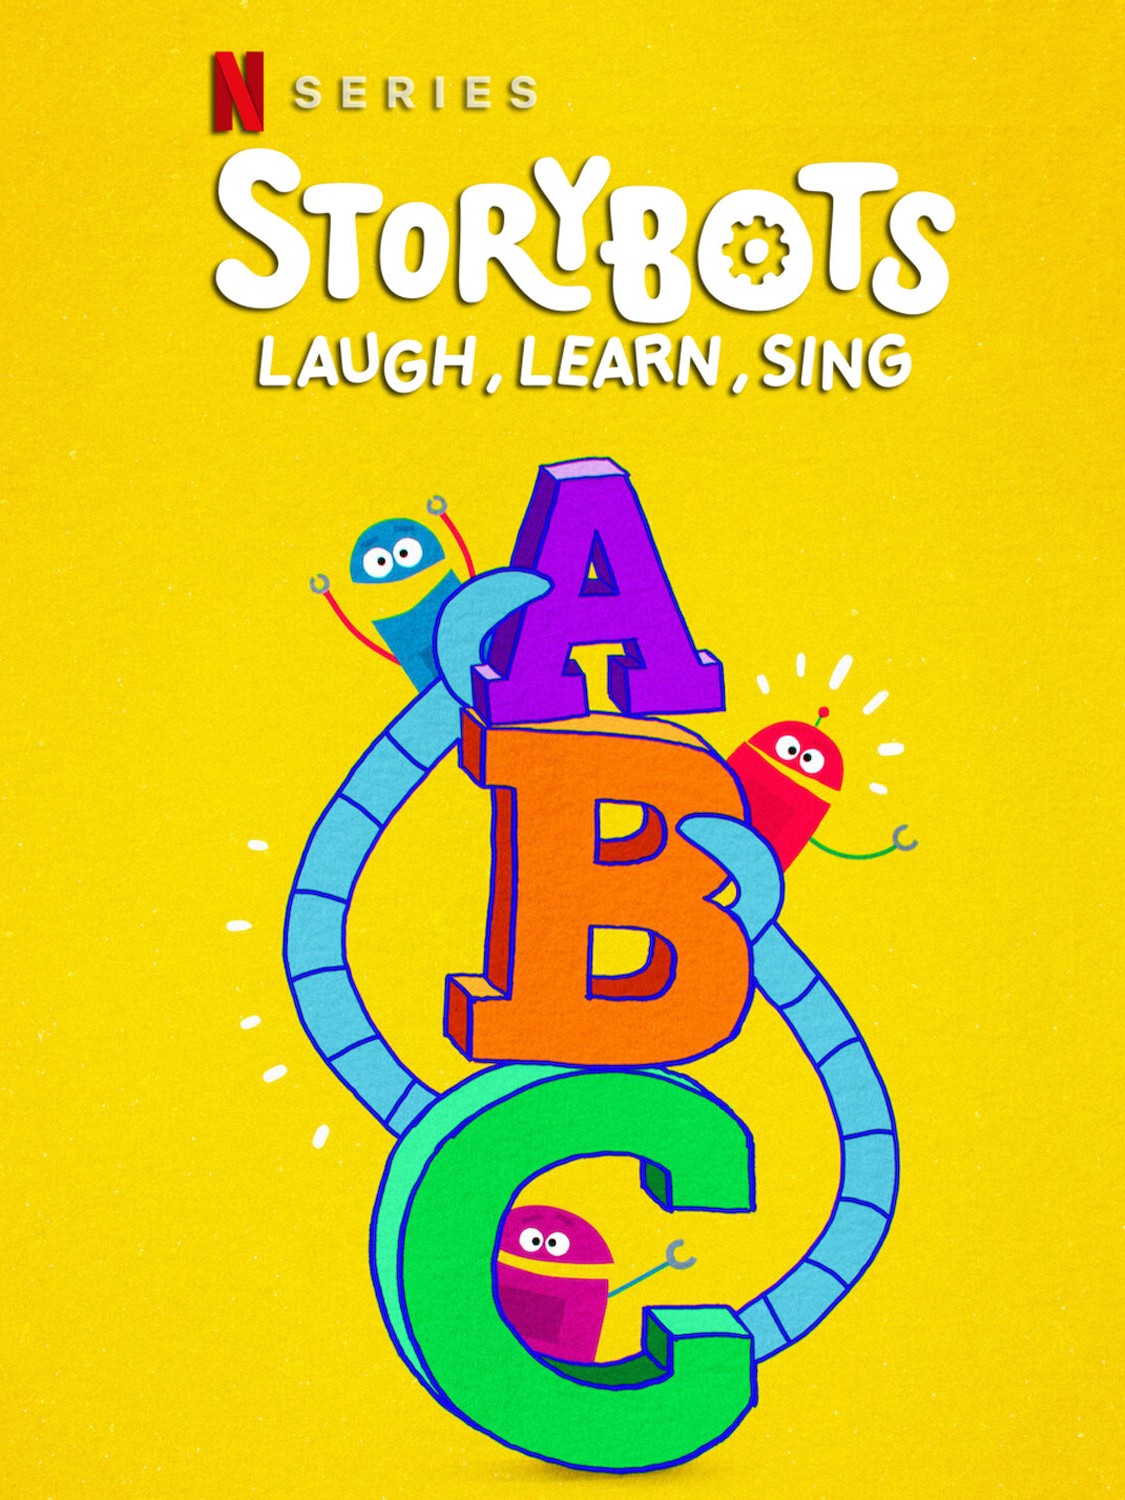 Is StoryBots Laugh, Learn, Sing on Netflix